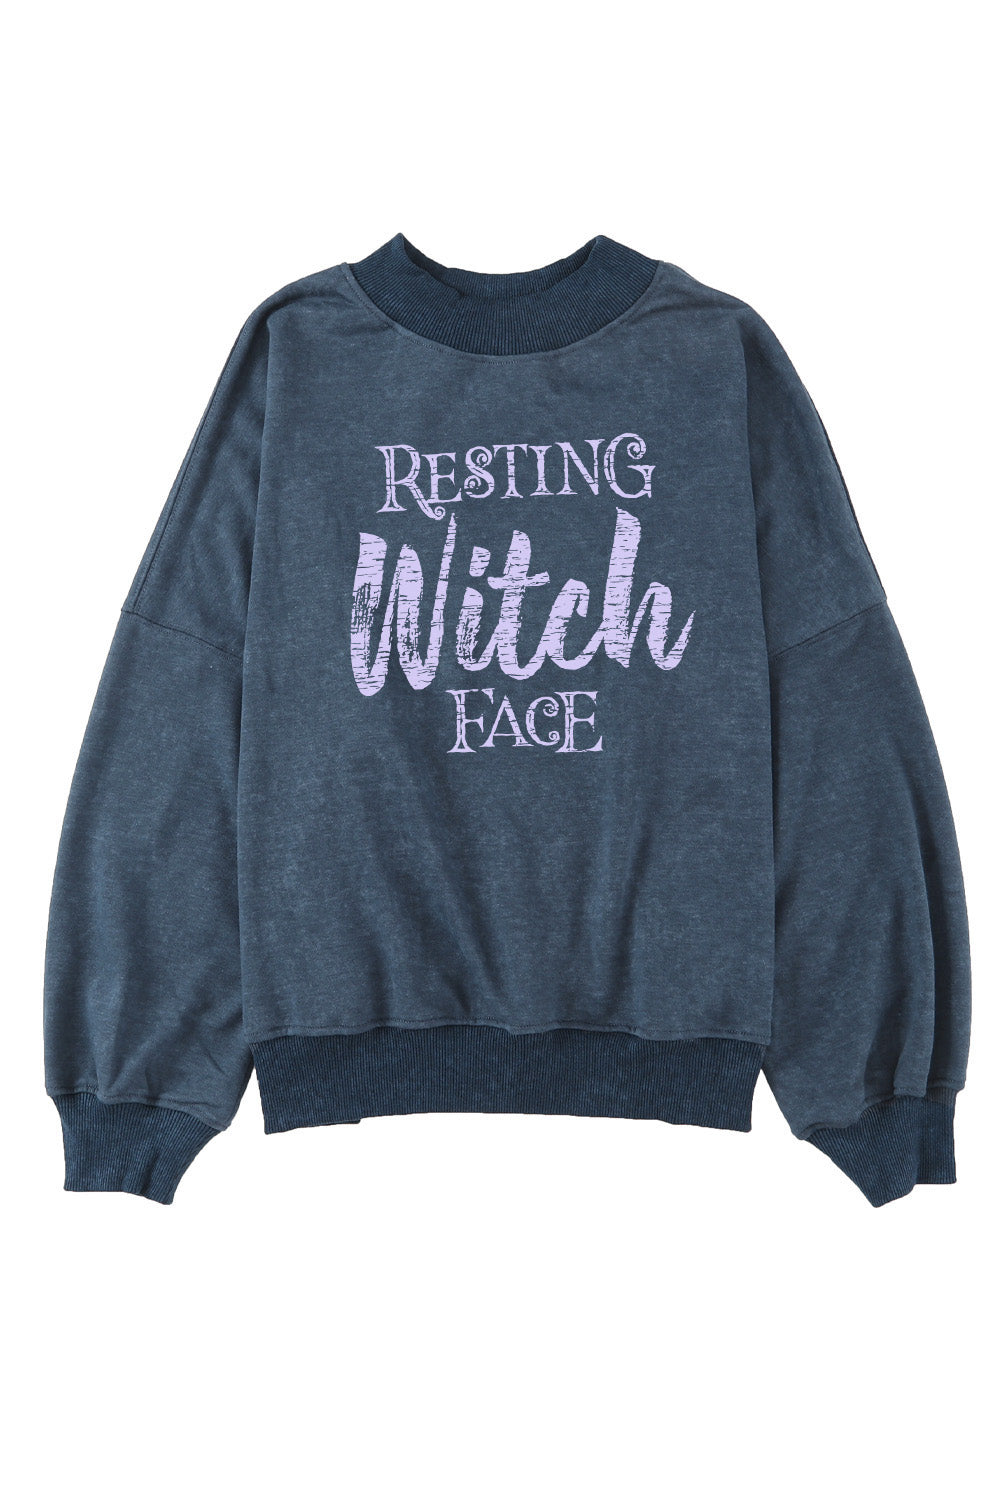 Round Neck RESTING WITCH FACE Graphic Sweatshirt - T-Shirts - Shirts & Tops - 3 - 2024